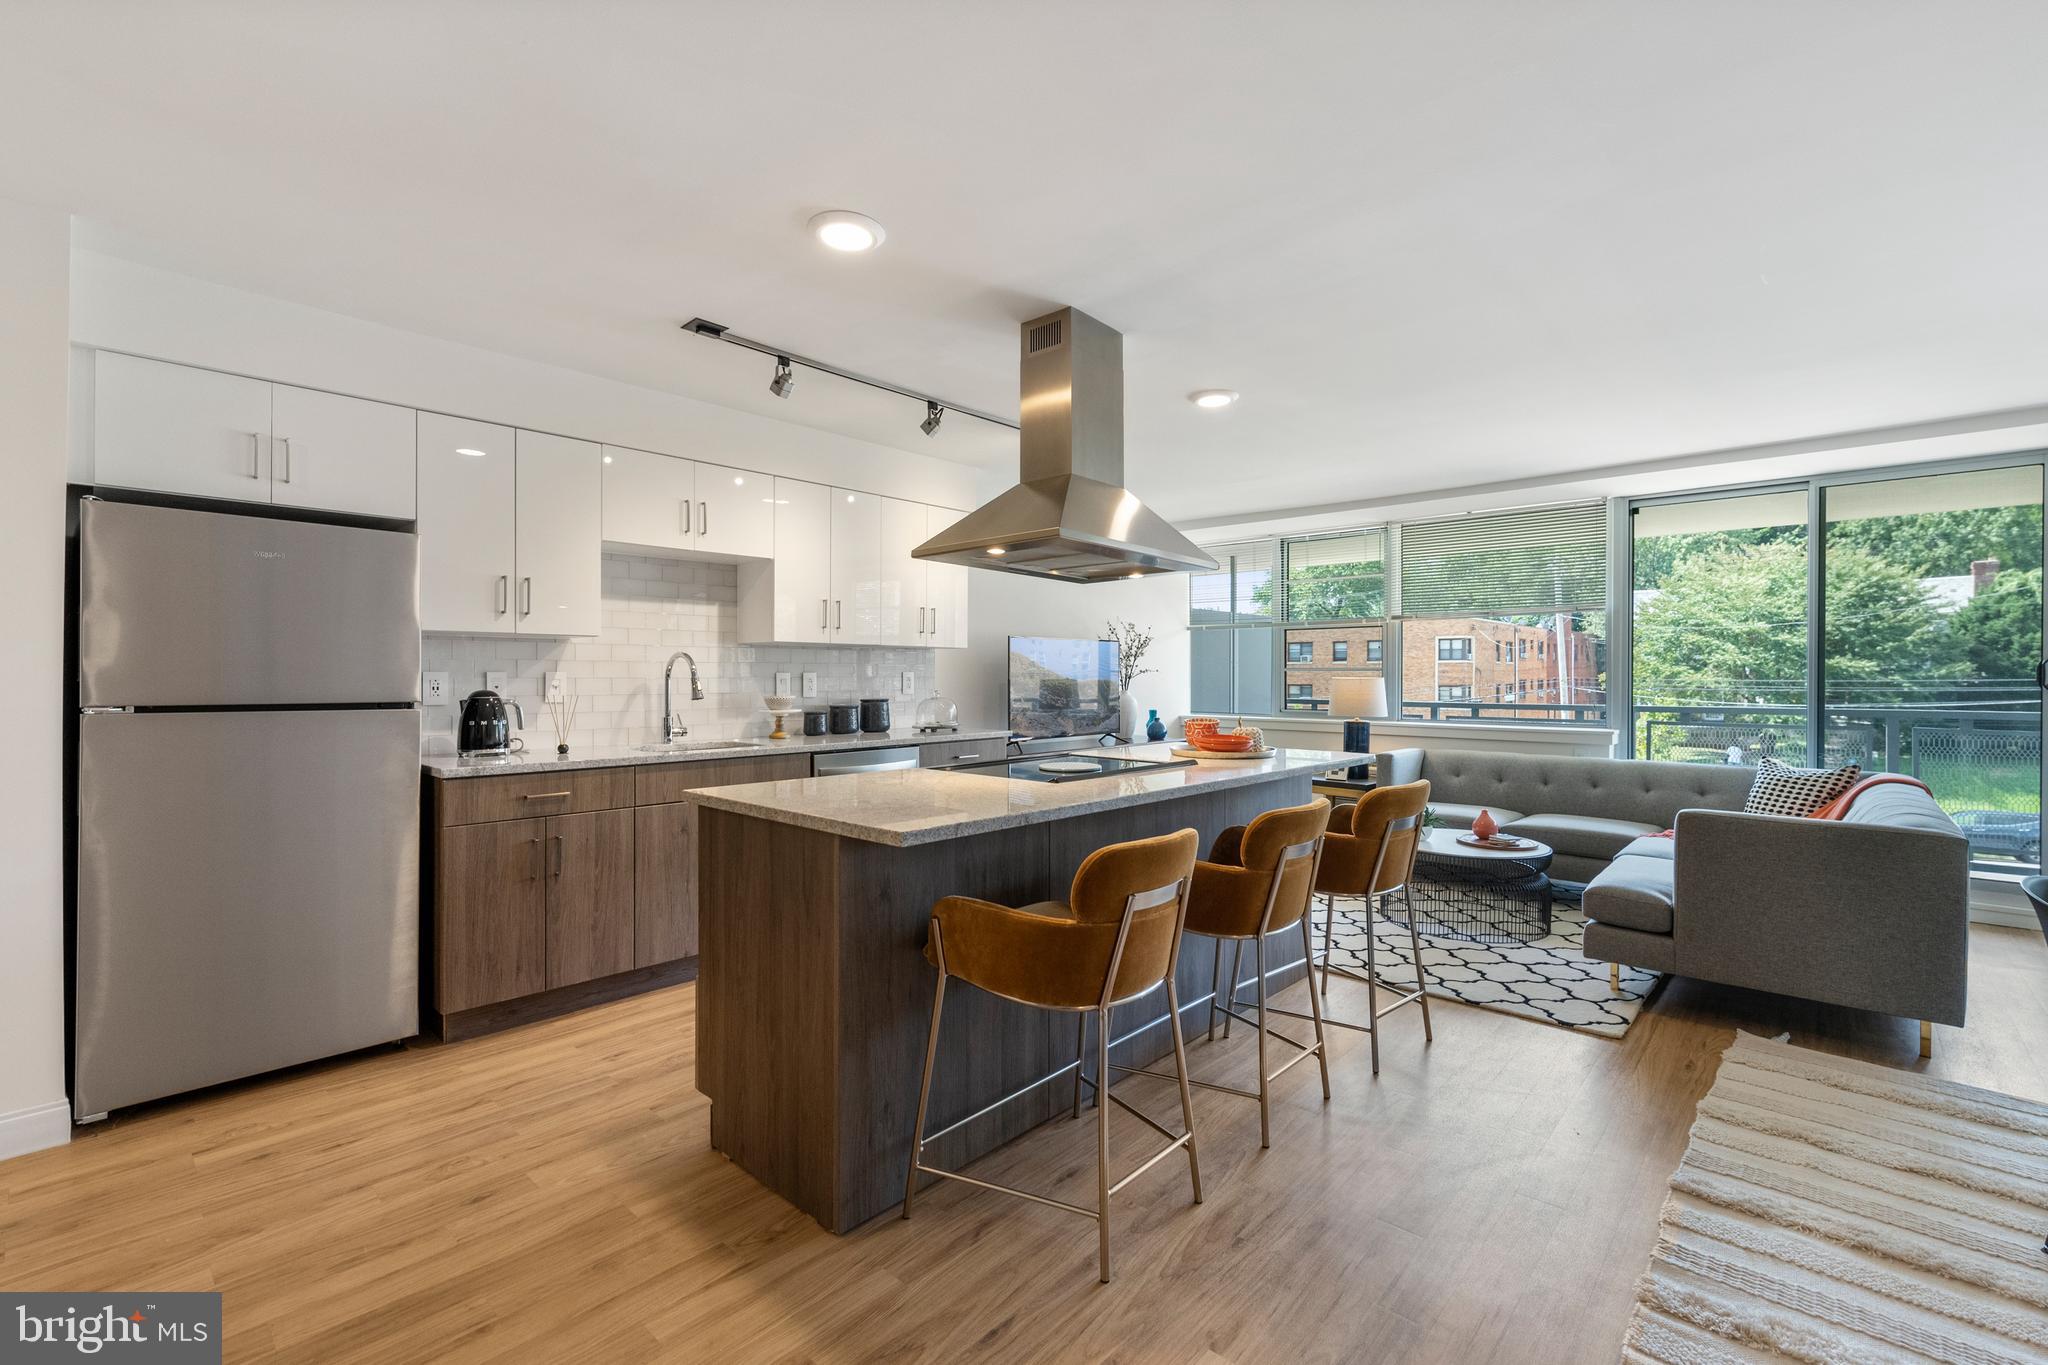 a kitchen with kitchen island wooden floors and stainless steel appliances